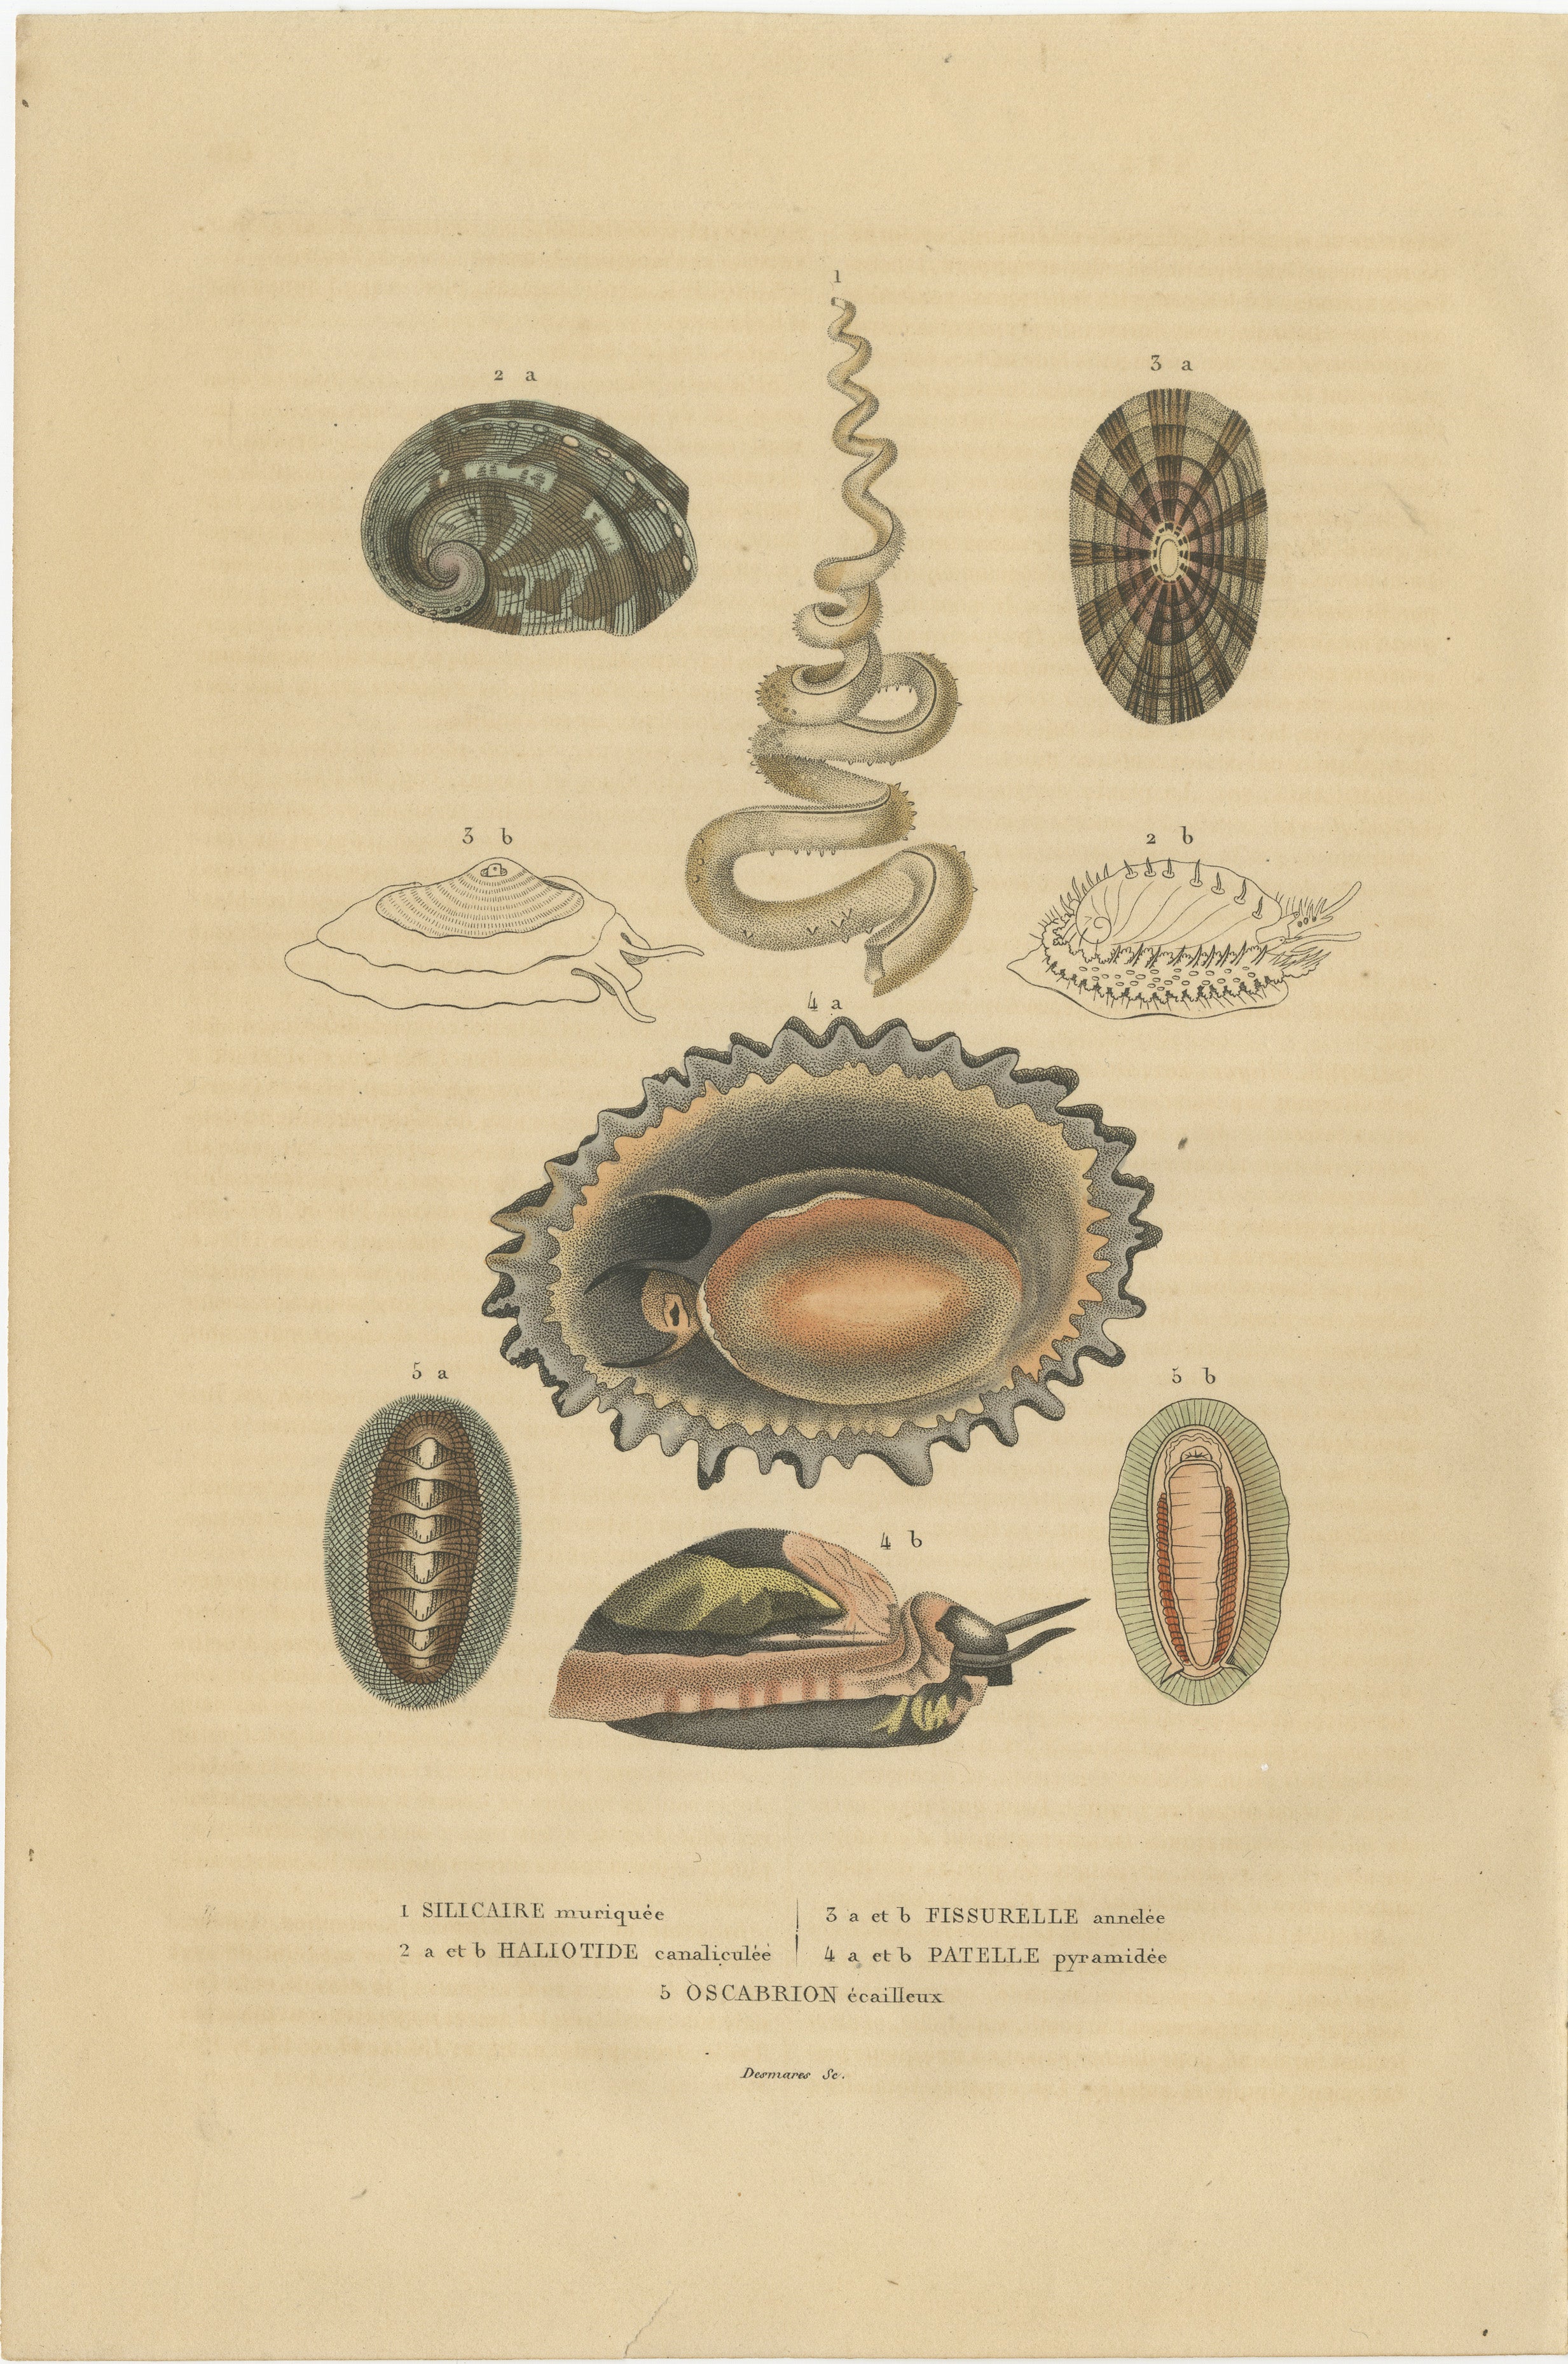 This original antique engraving depicts a collection of marine mollusks, which are a diverse group of invertebrates living mostly in aquatic habitats. These are likely depicted for their shell structures:

1. **Silicaire muriquée** - Possibly